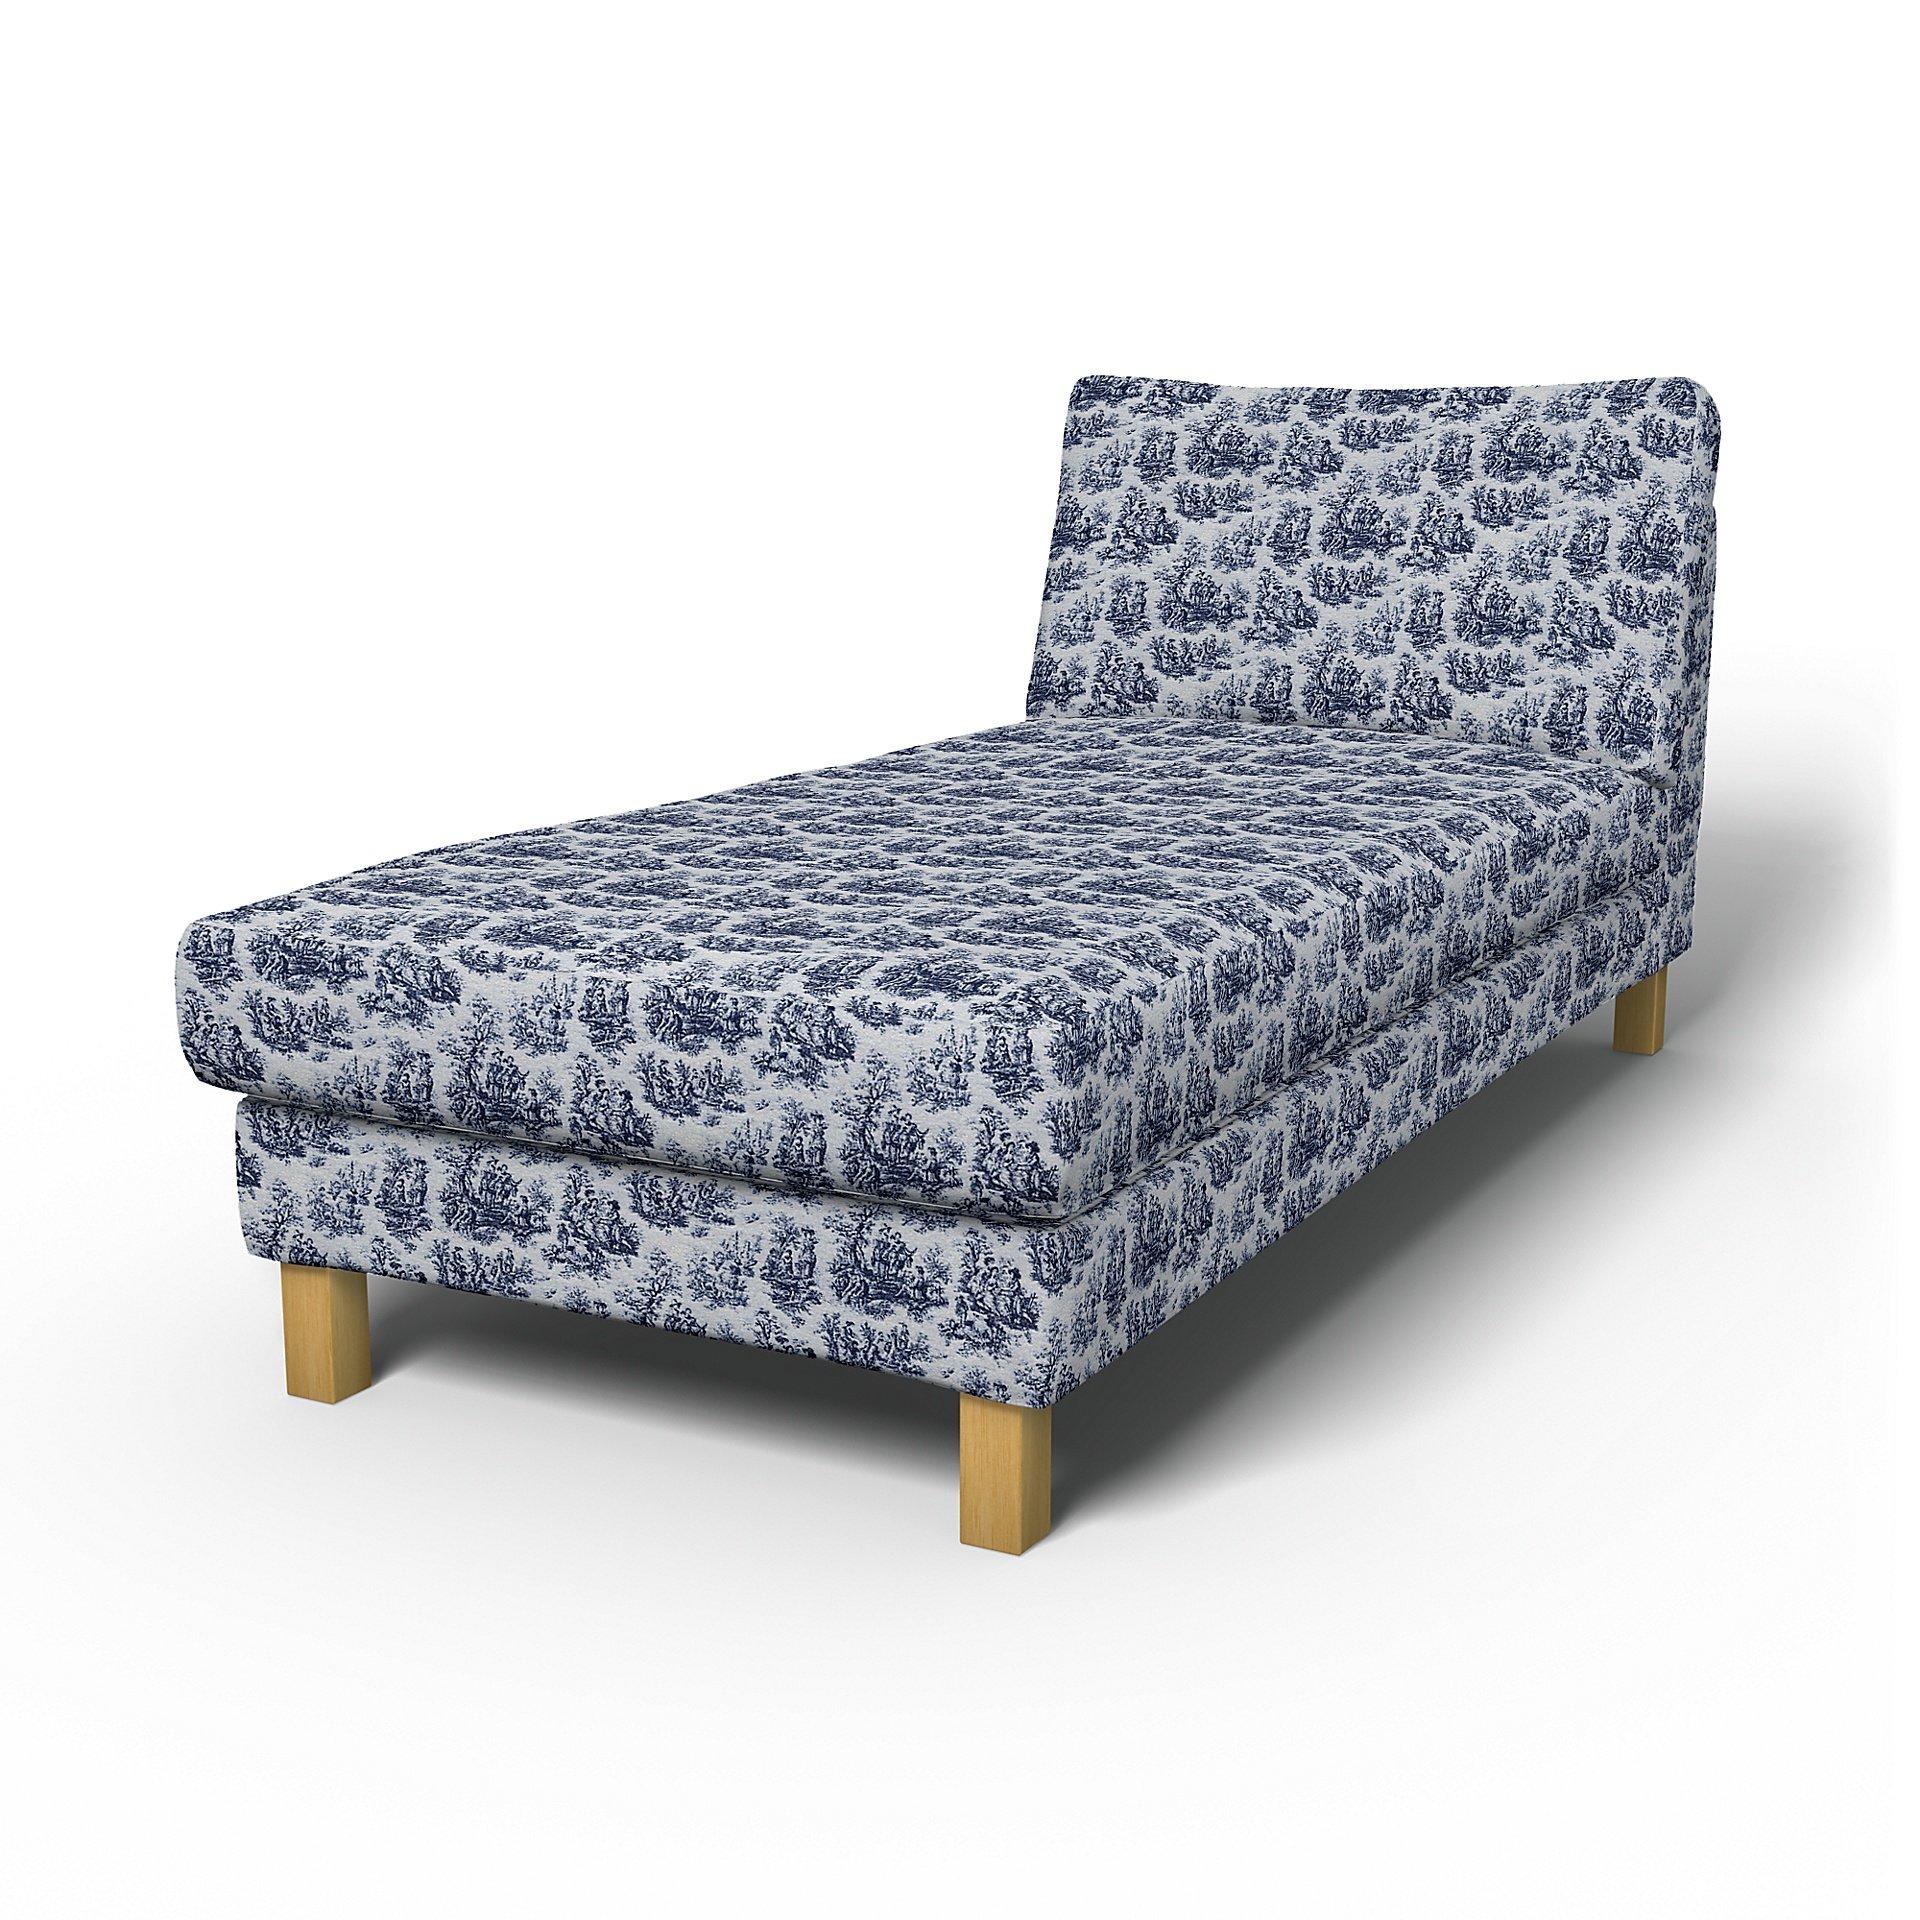 IKEA - Karlstad Stand Alone Chaise Longue Cover, Dark Blue, Boucle & Texture - Bemz